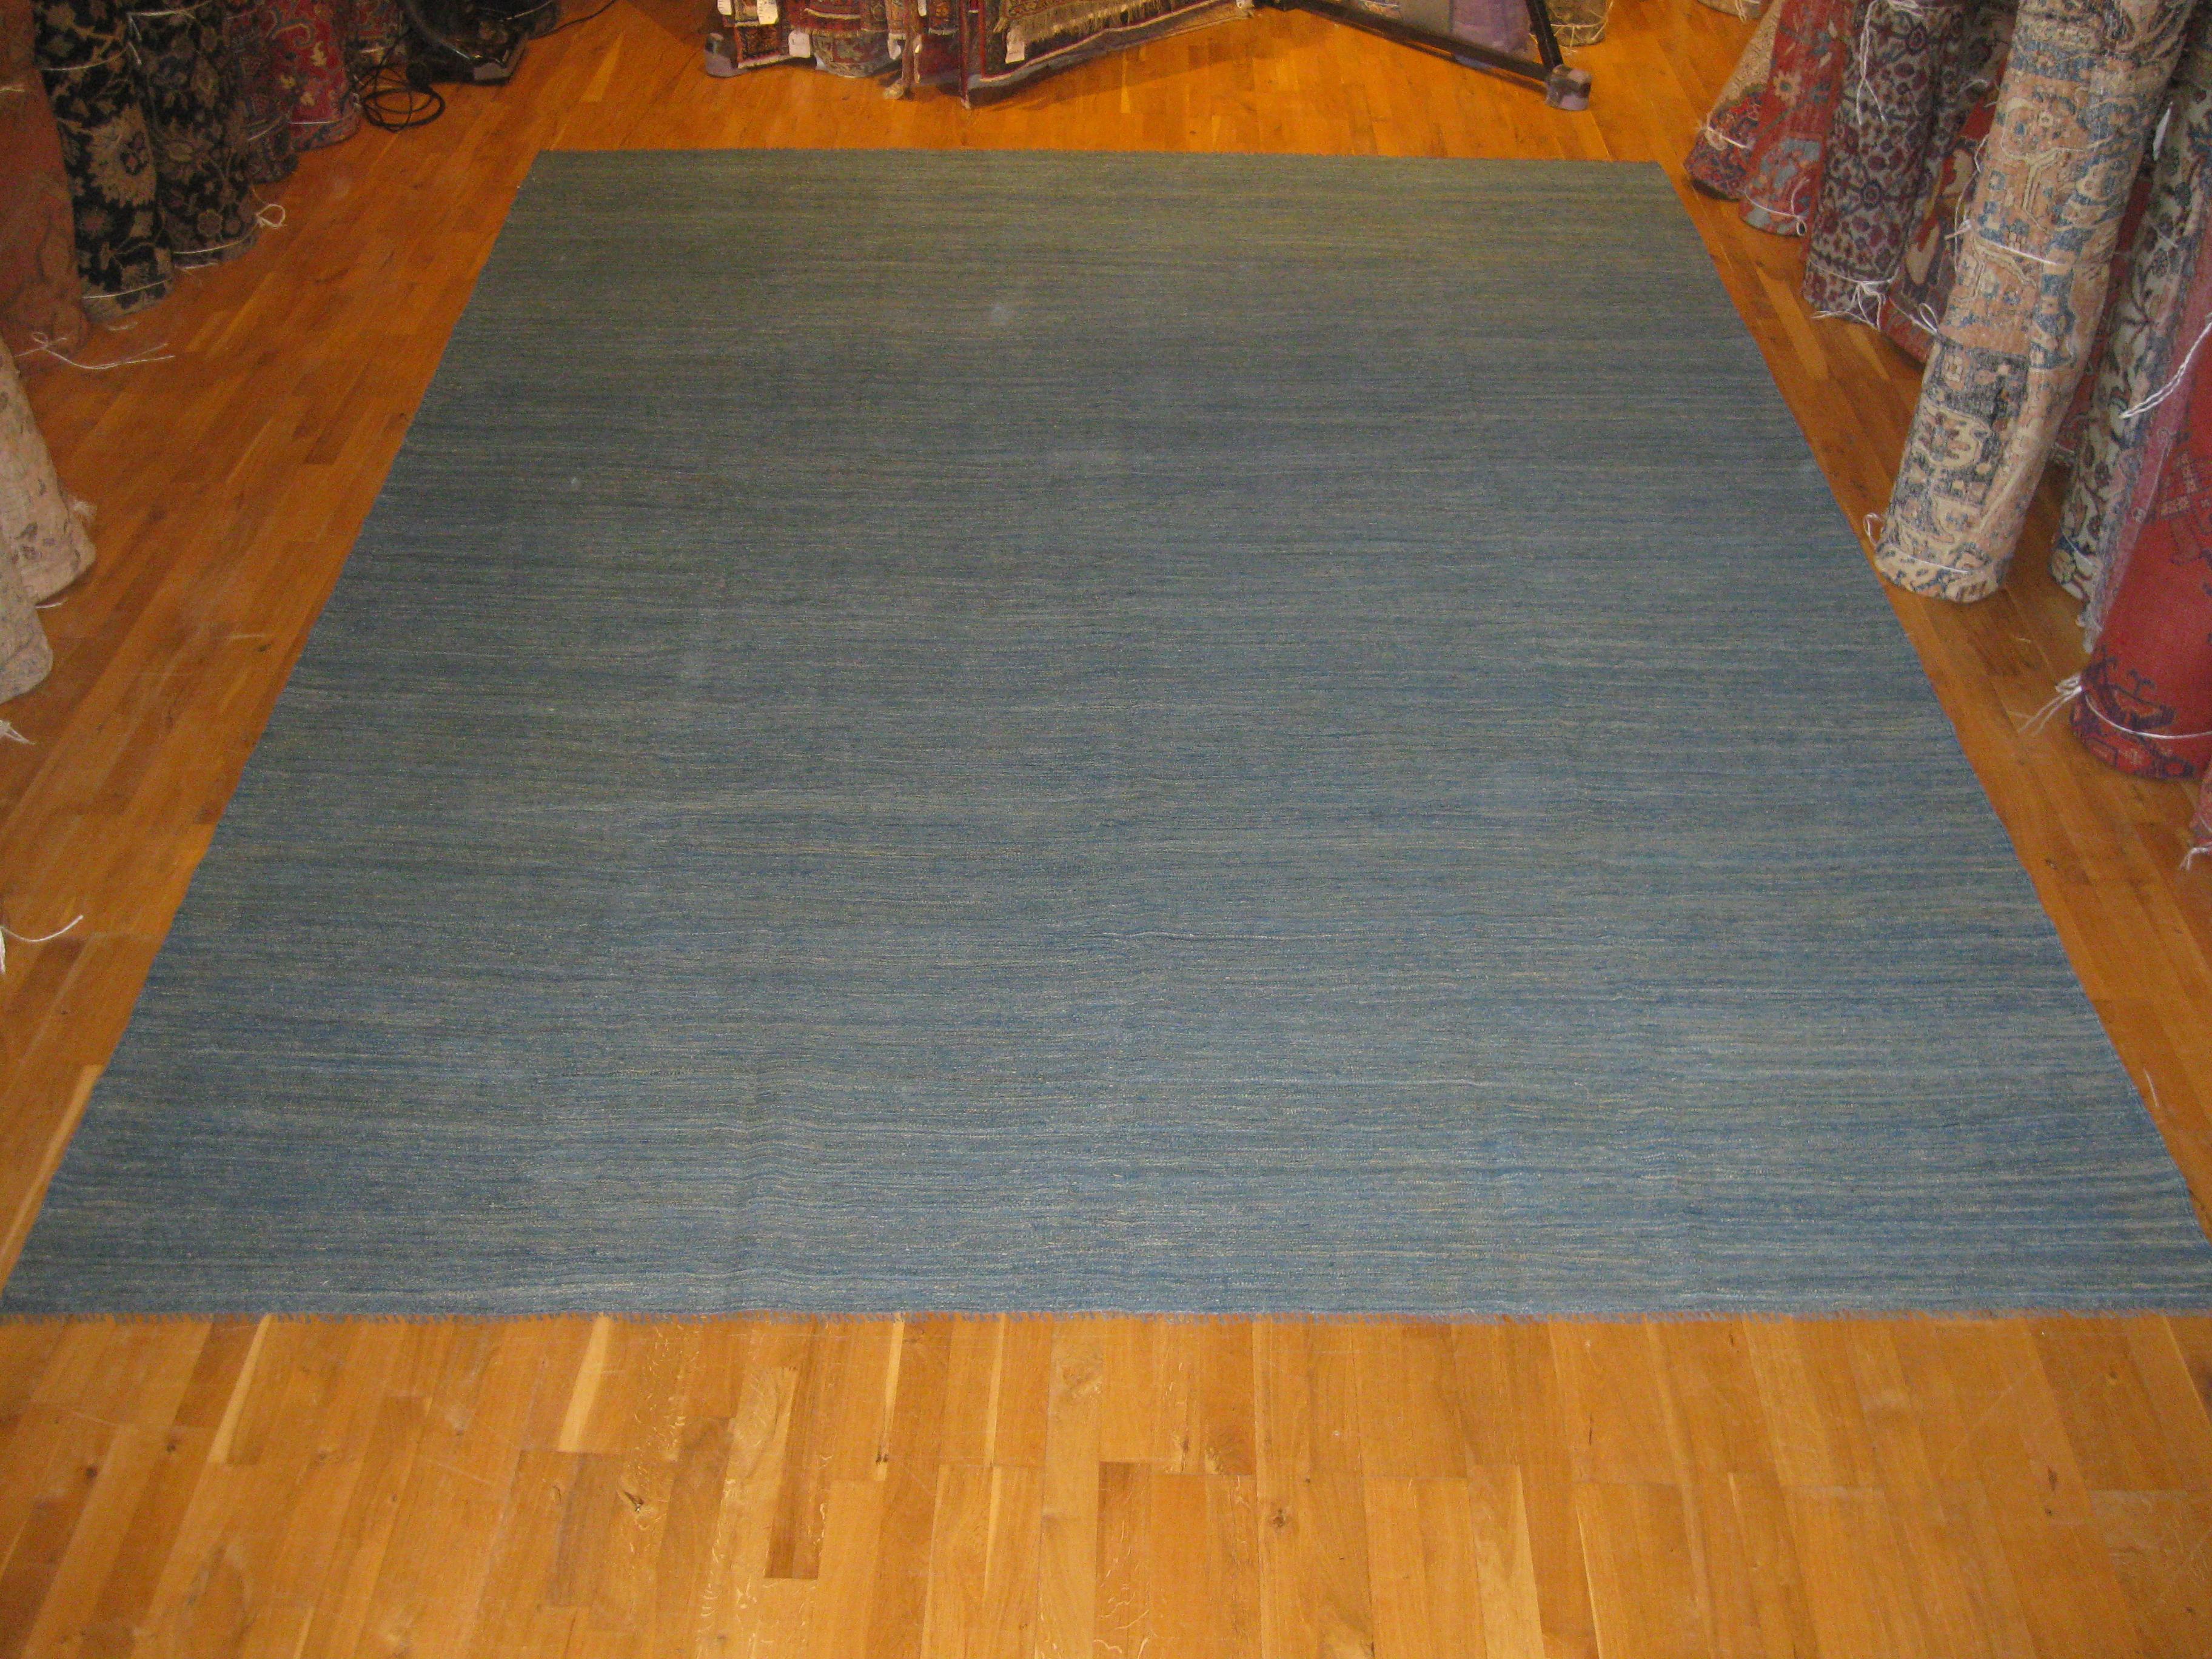 A sea of blue with subtle hints of gold and ivory. Kilims have a well-deserved popularity not least because they are reversible, easy to move and easy to care for. Use this large Kilim on its own or add another layer over to give a space a